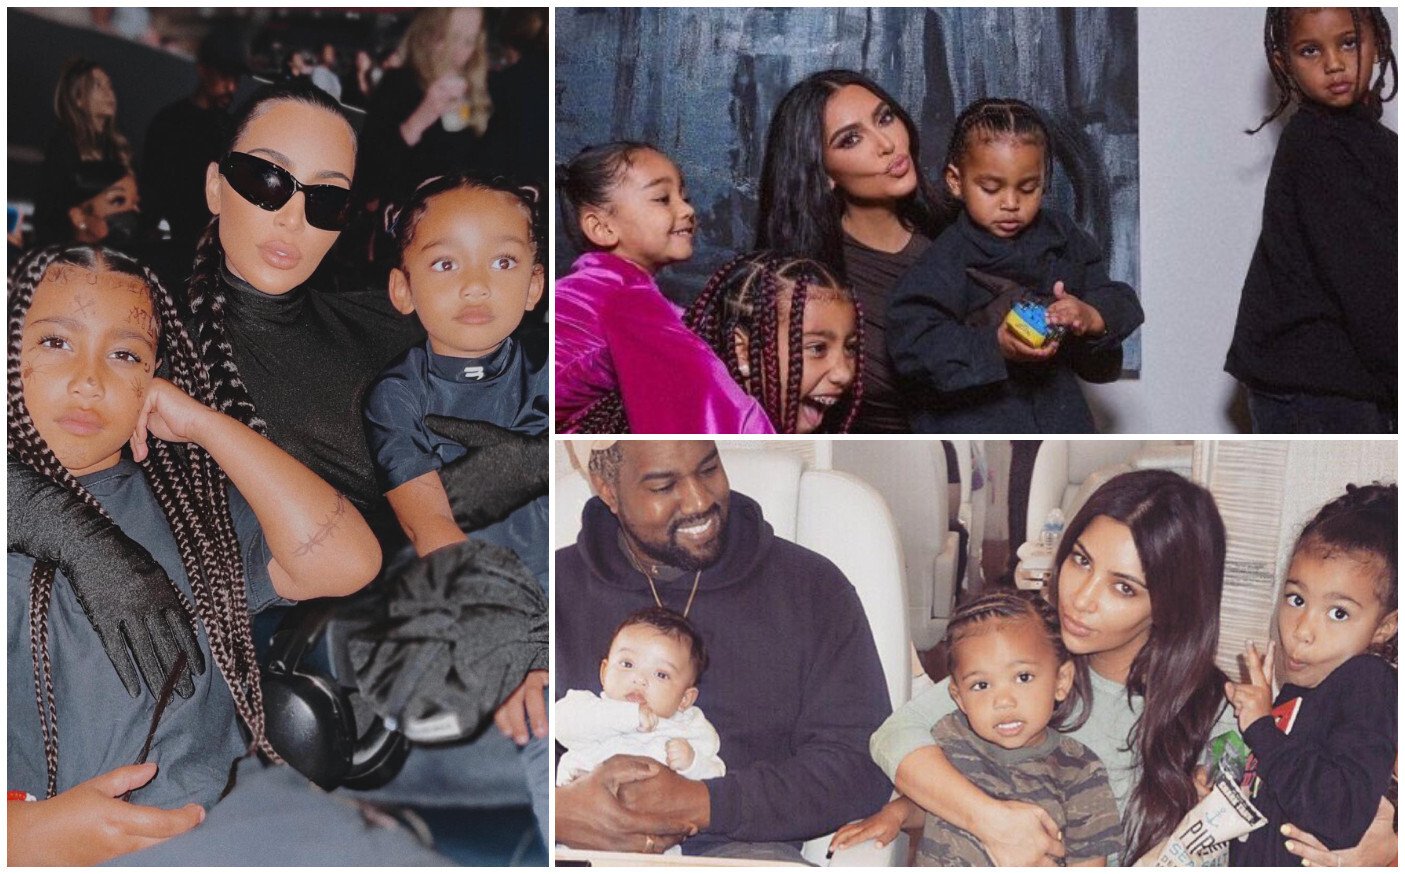 North, Chicago, Psalm and Saint West have a pretty lucky life. Find out how Kim Kardashian and Kanye West’s kids roll. Photos:@kimkardashian/Instagram